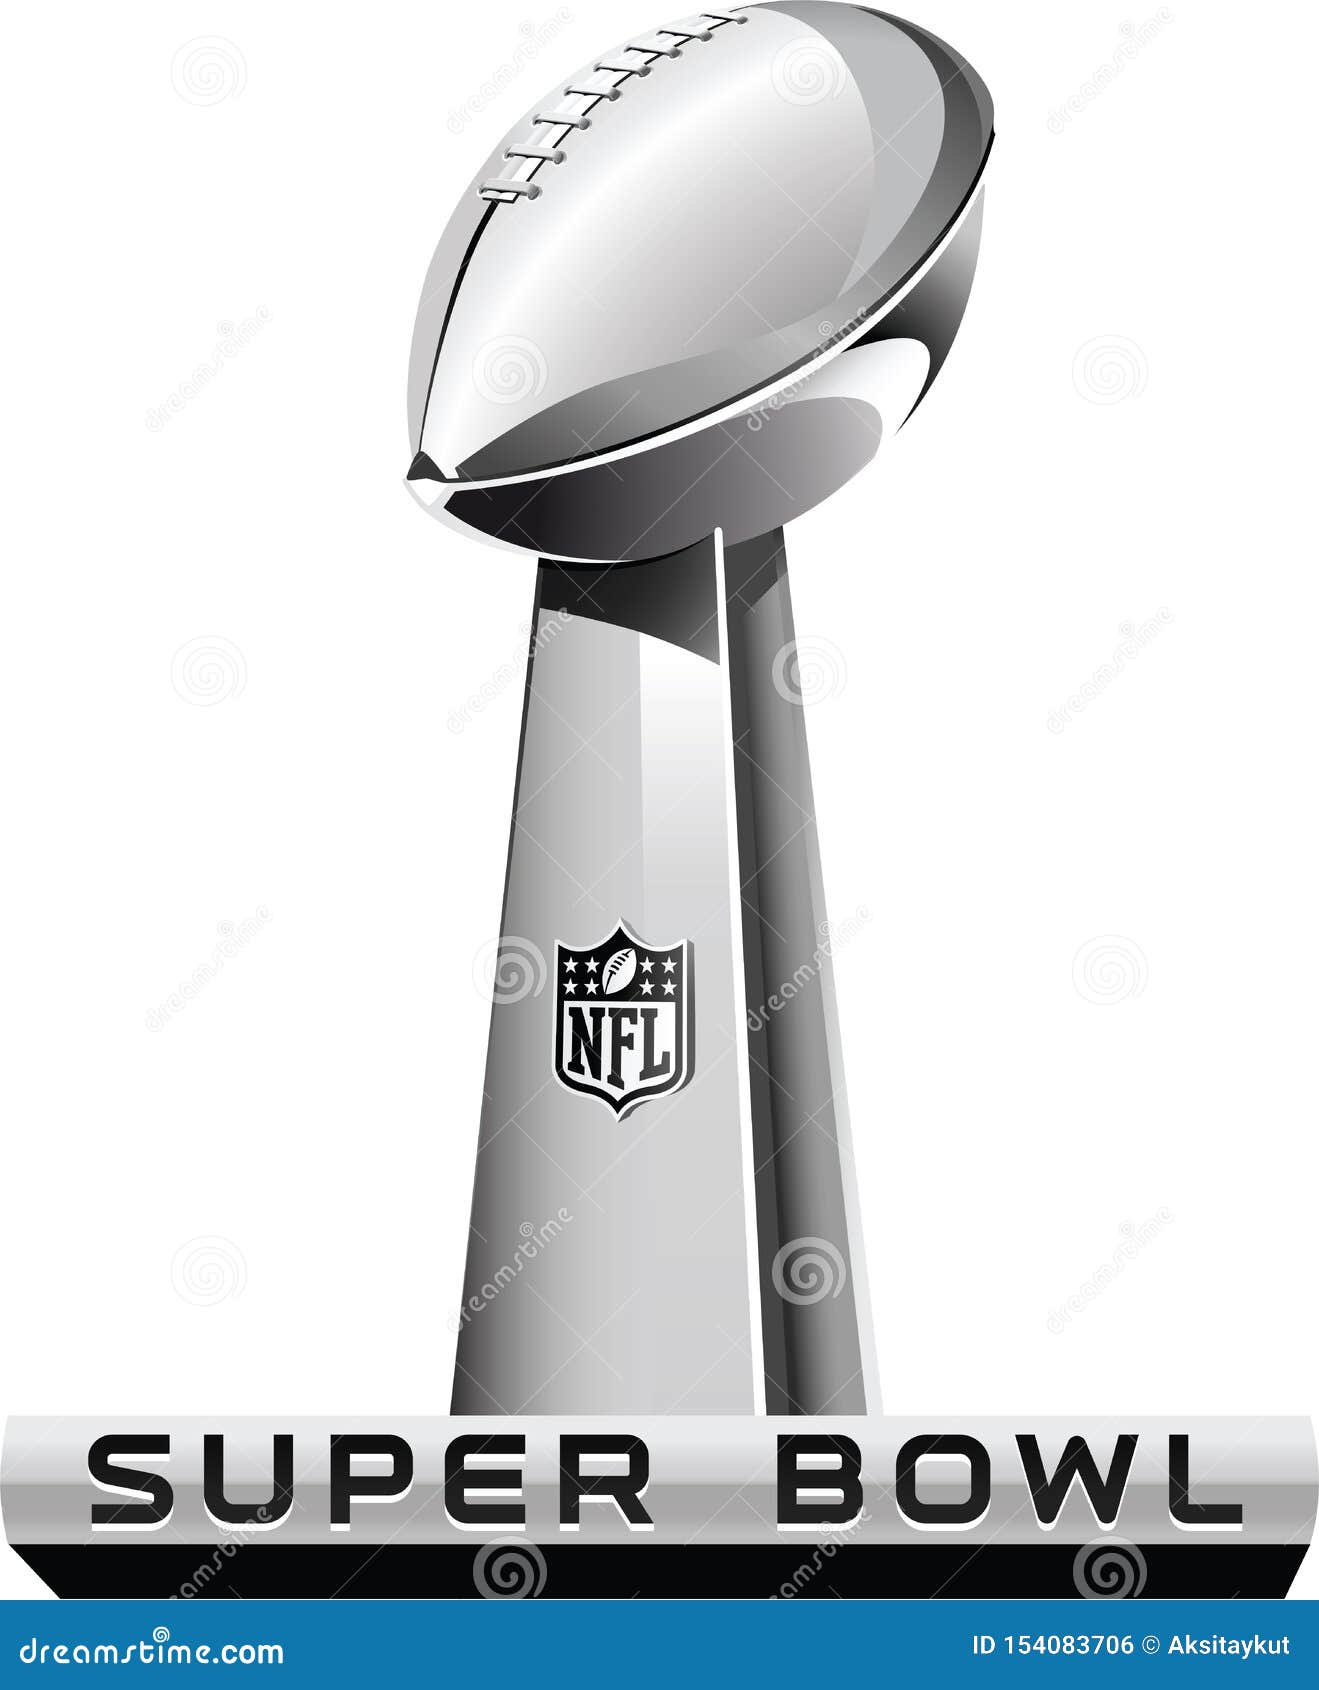 The Super Bowl LVIII logo is its most original design in years